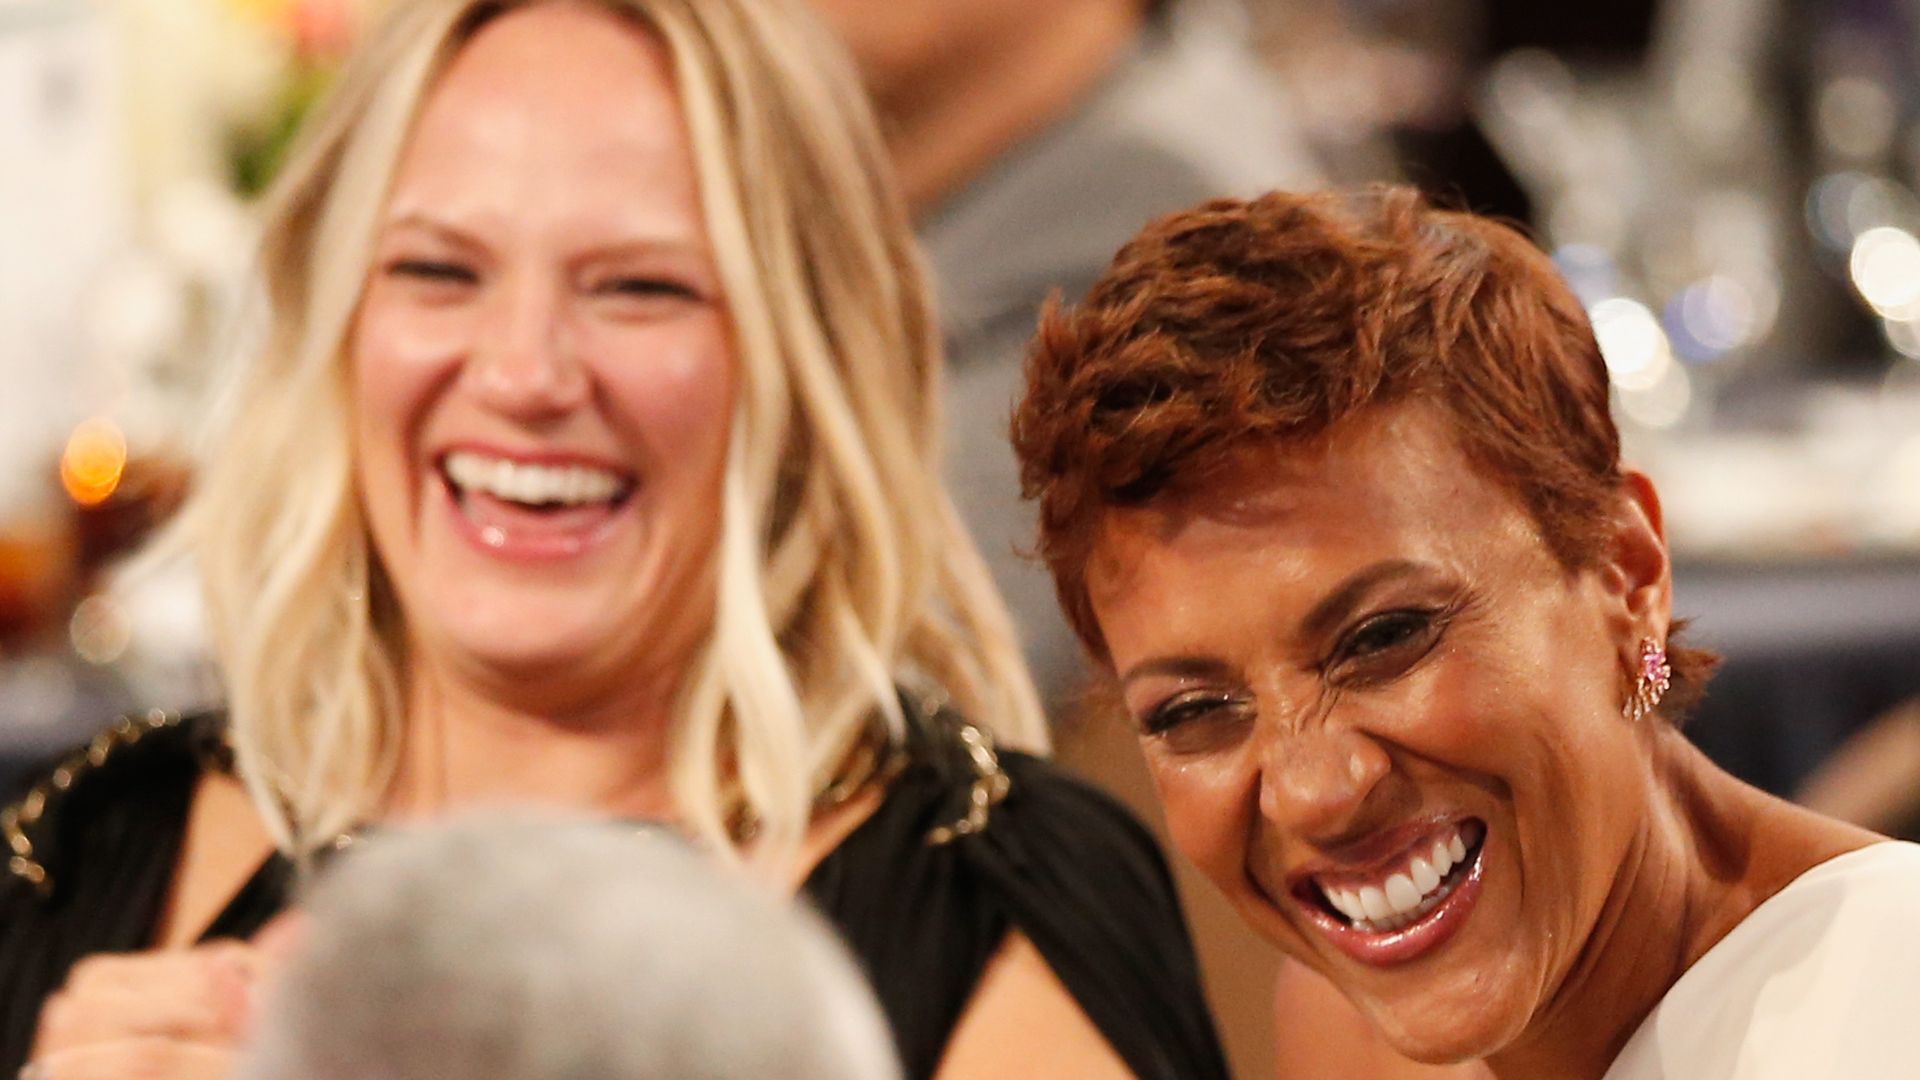 Robin Roberts and Amber Laign smiling dinner